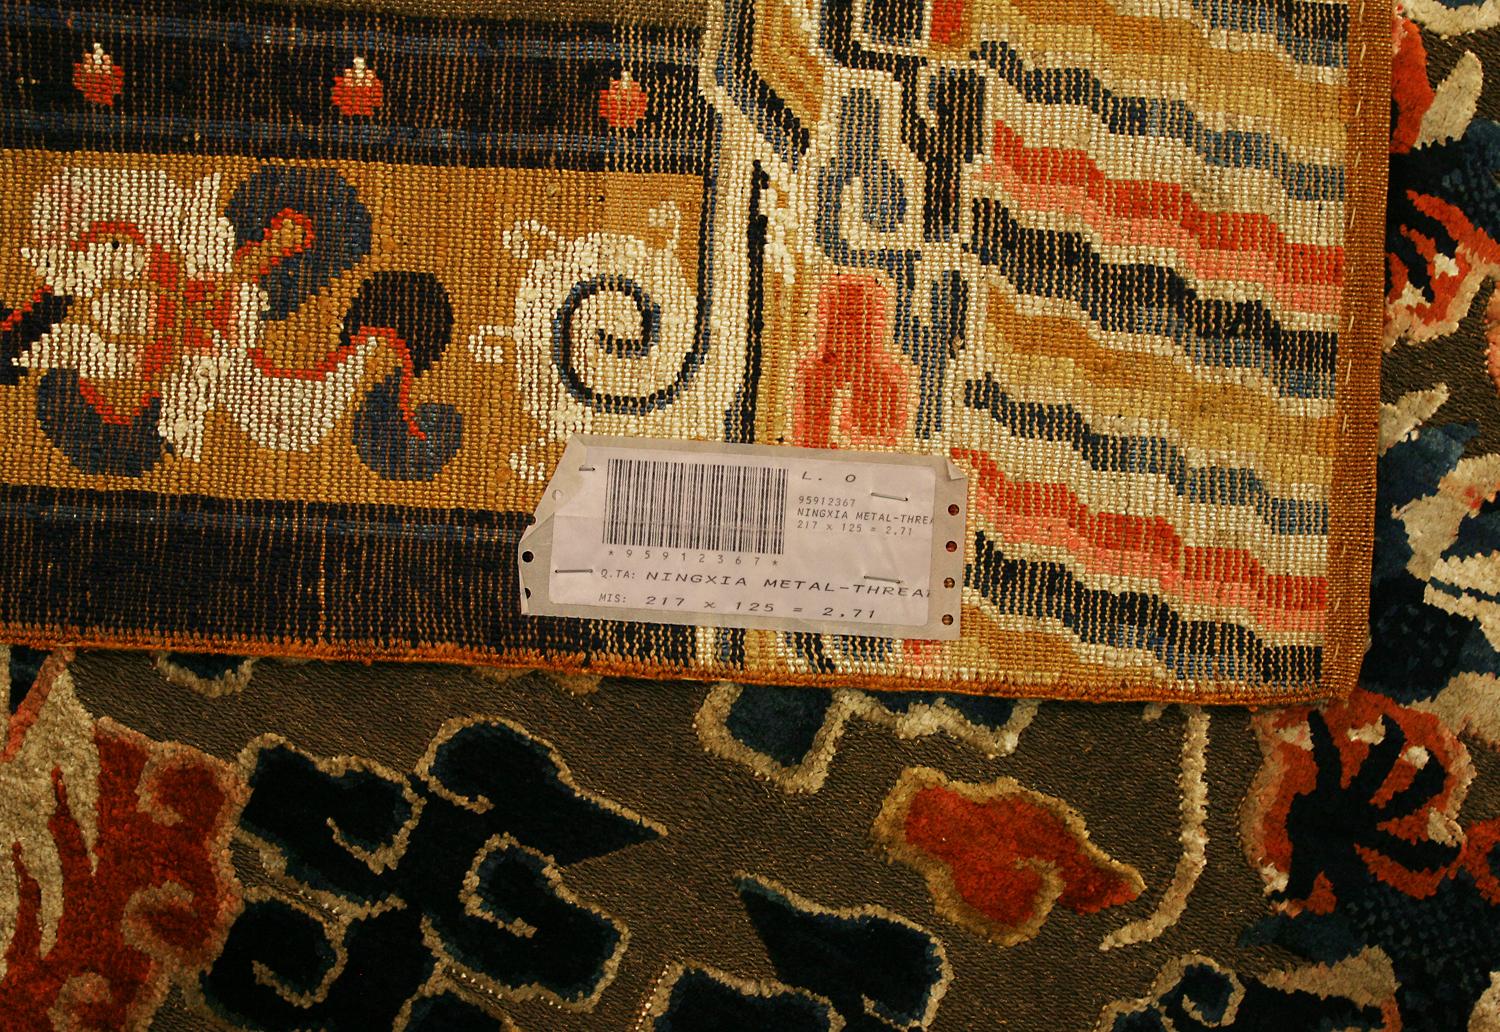 19th Century Ningxia Brown Metal-Thread Imperial Palace Souf Chinese Rug For Sale 3